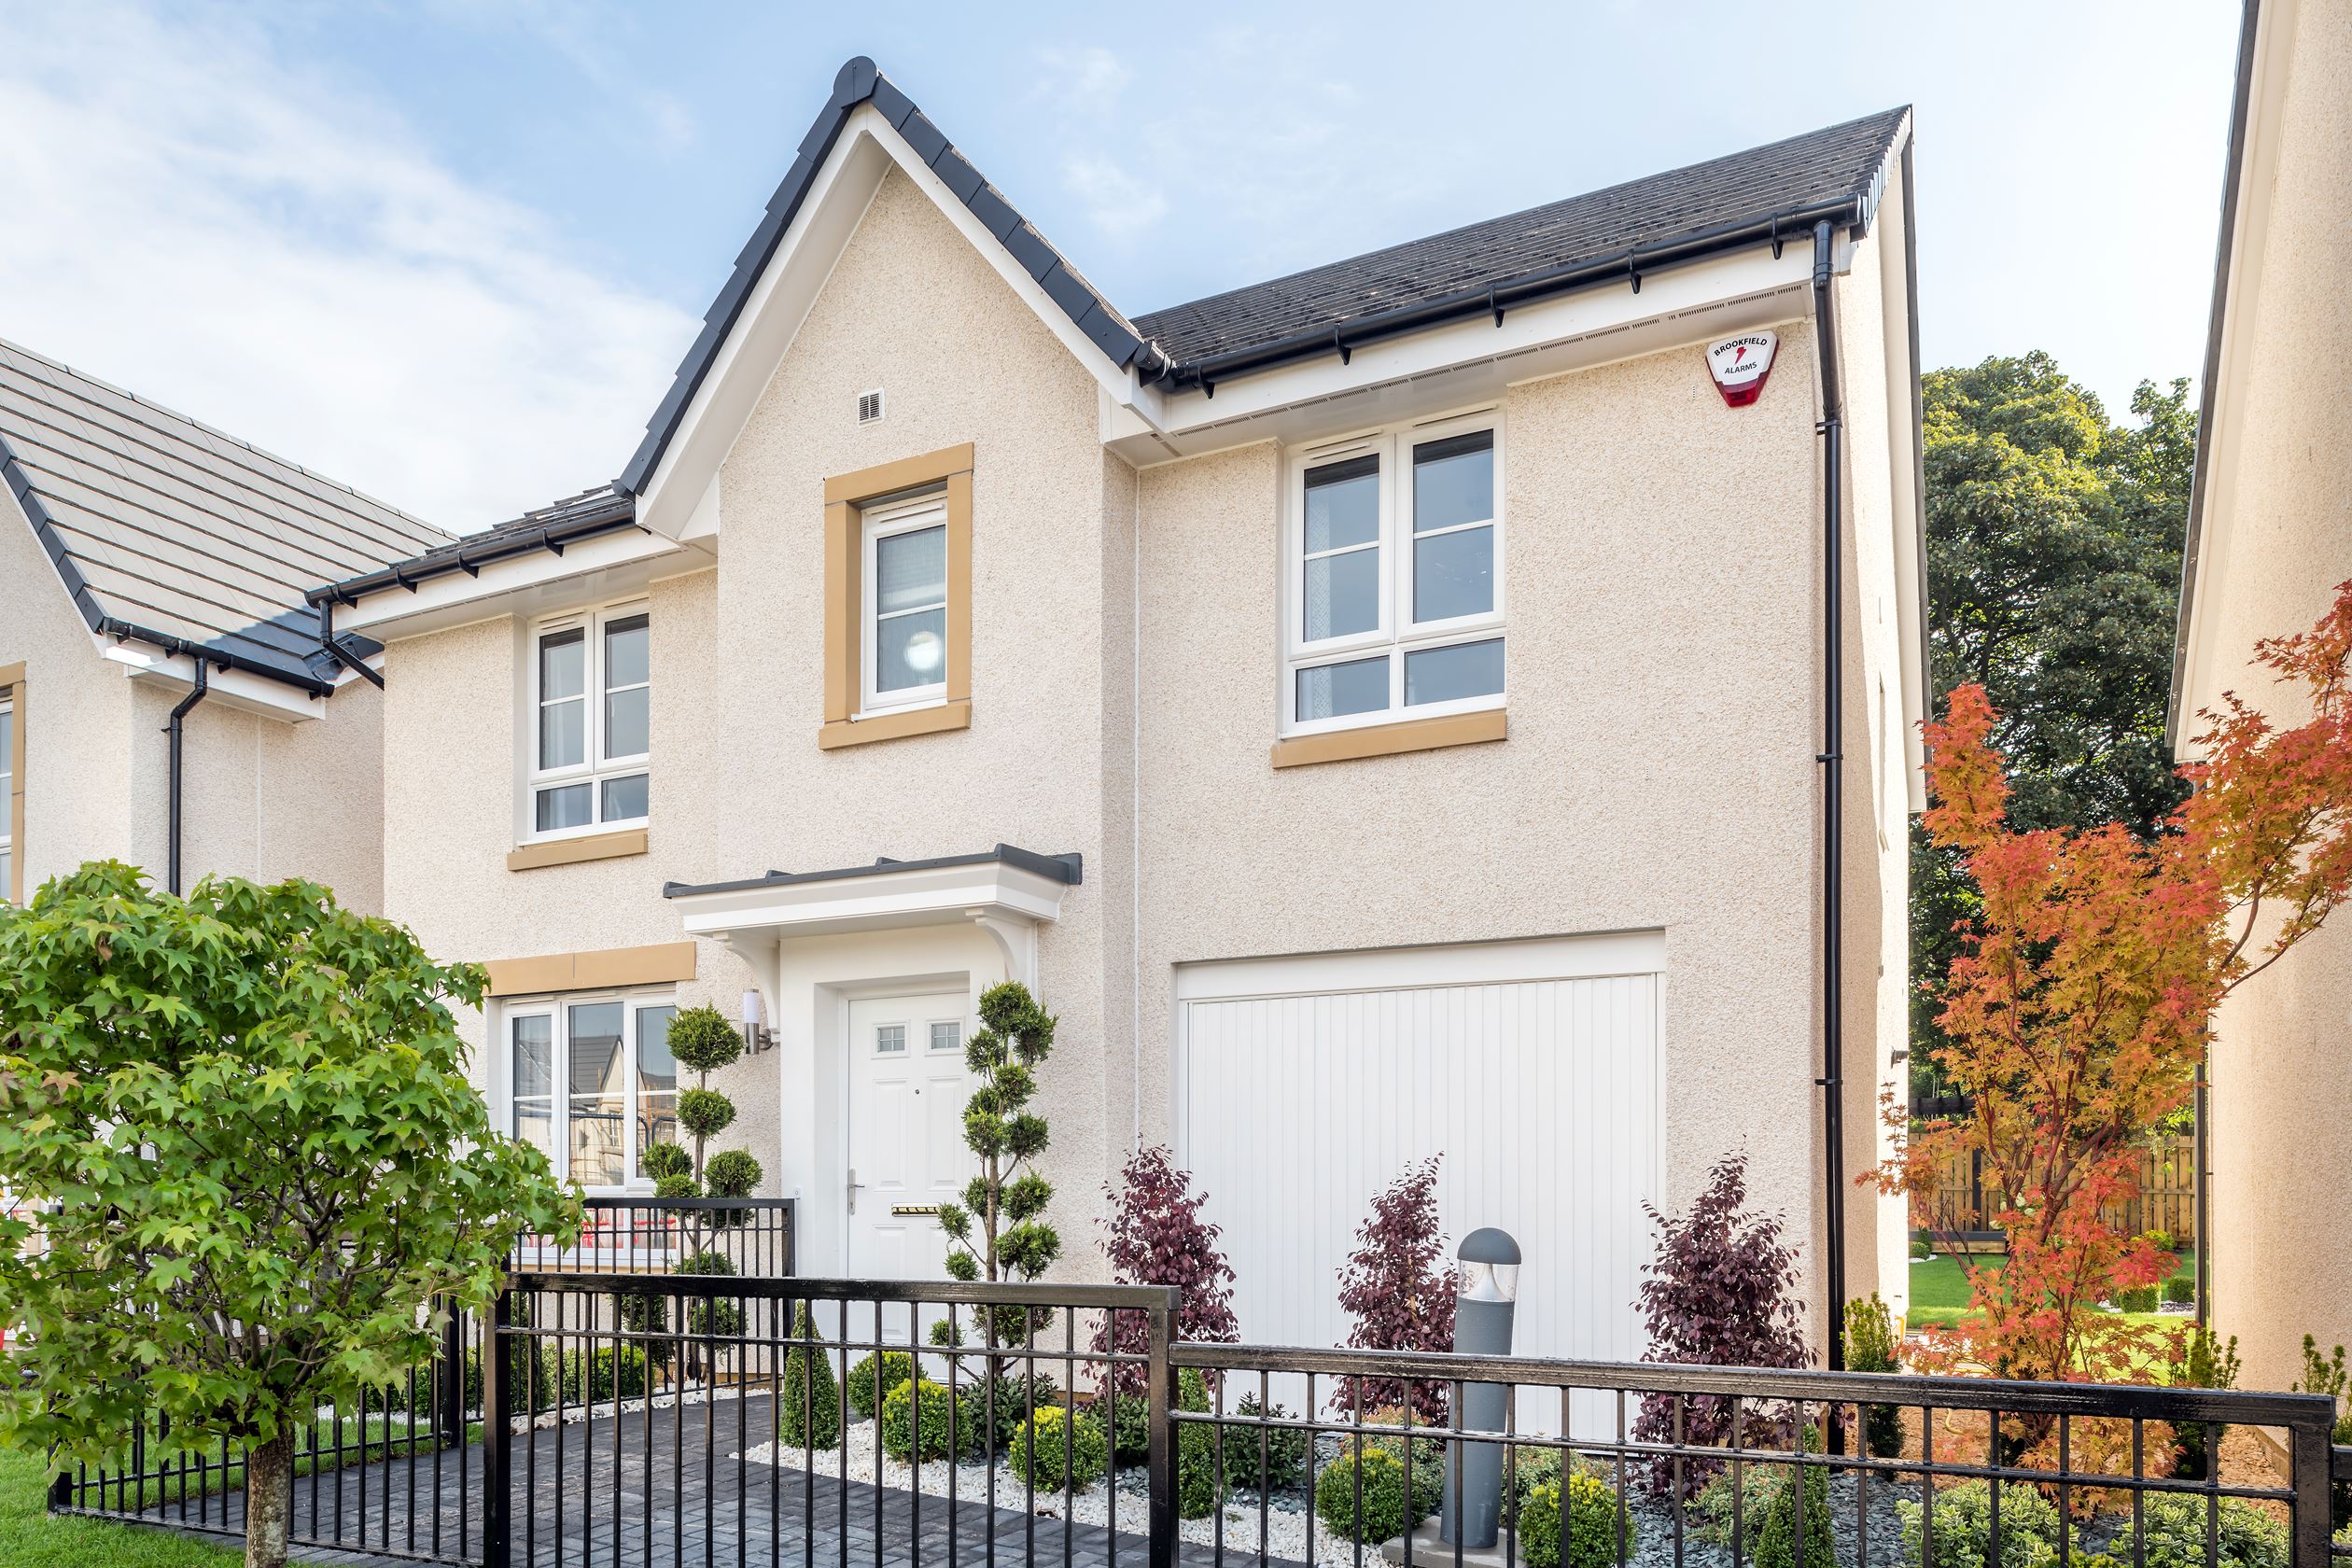 New Homes For Sale In Clydebank Barratt Homes